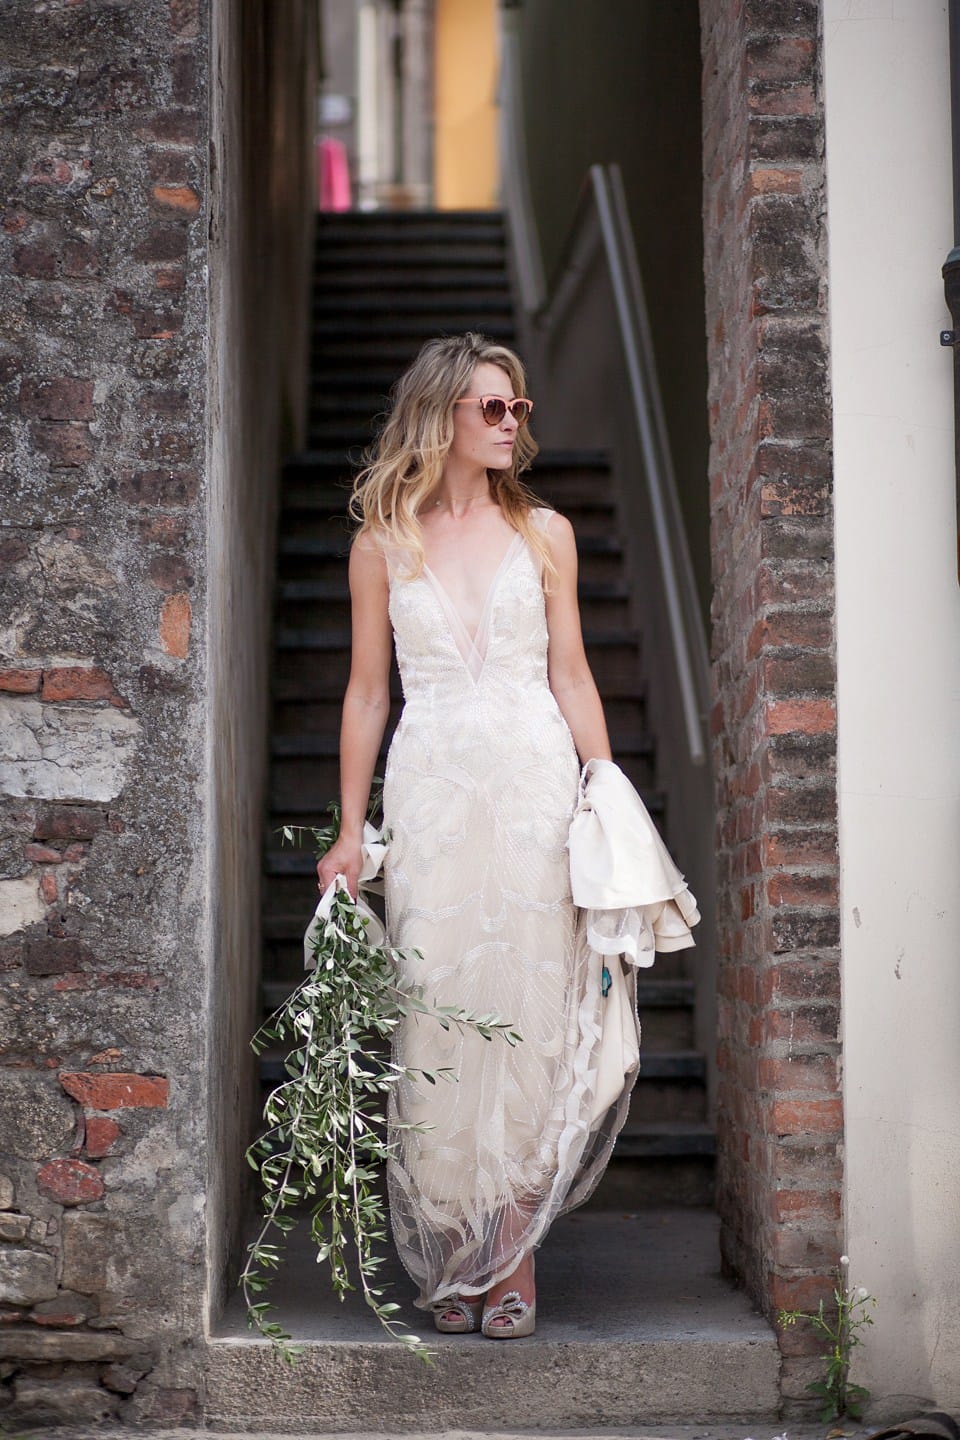 Super-Cool Italian Wedding with Vintage-Inspired Gown - Maggie Bride is wearing Gianna Marie by Maggie Sottero